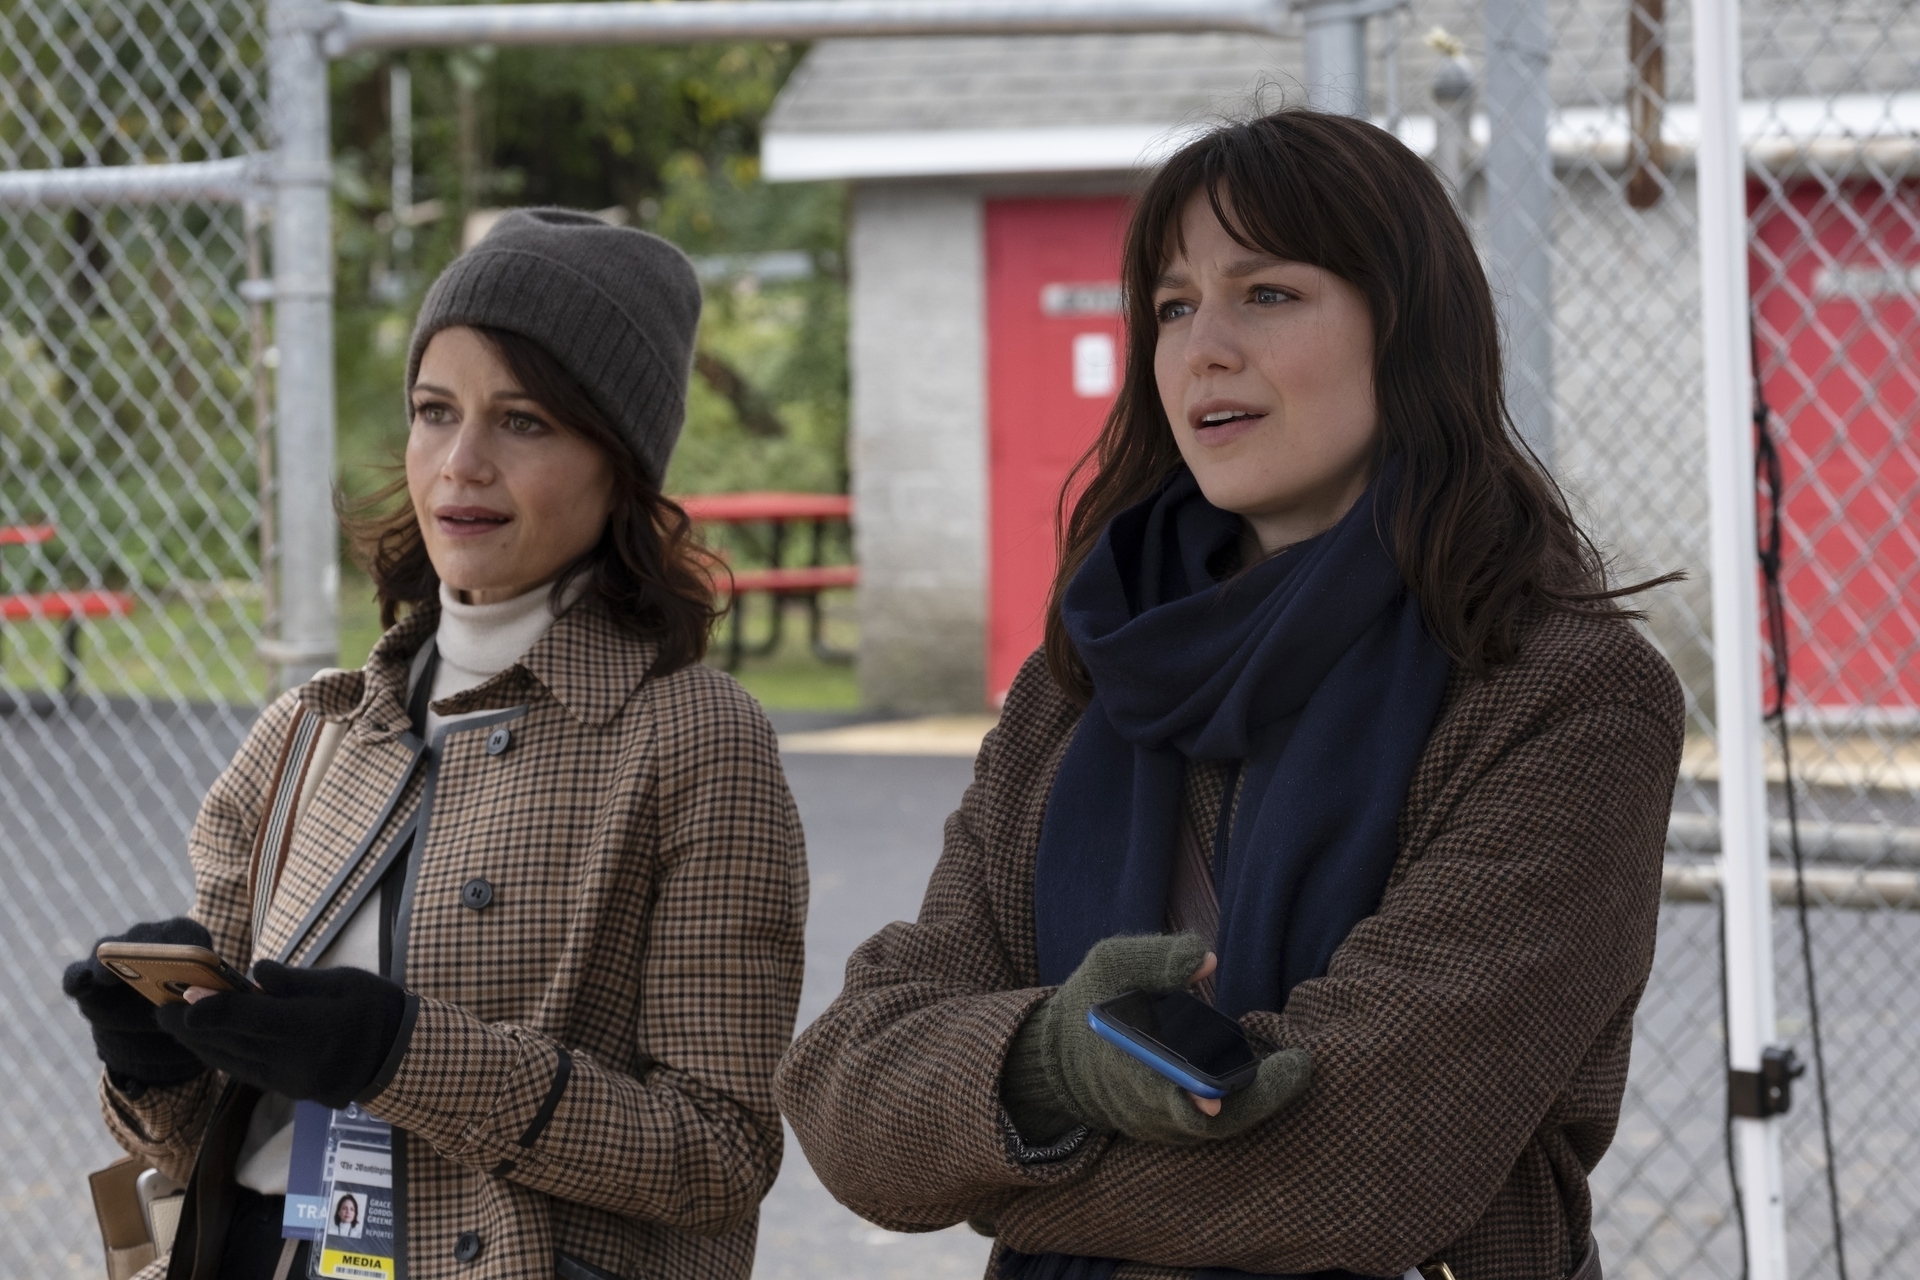 Carla Gugino and Melissa Benoist in The Girls on the Bus waiting outside in jackets